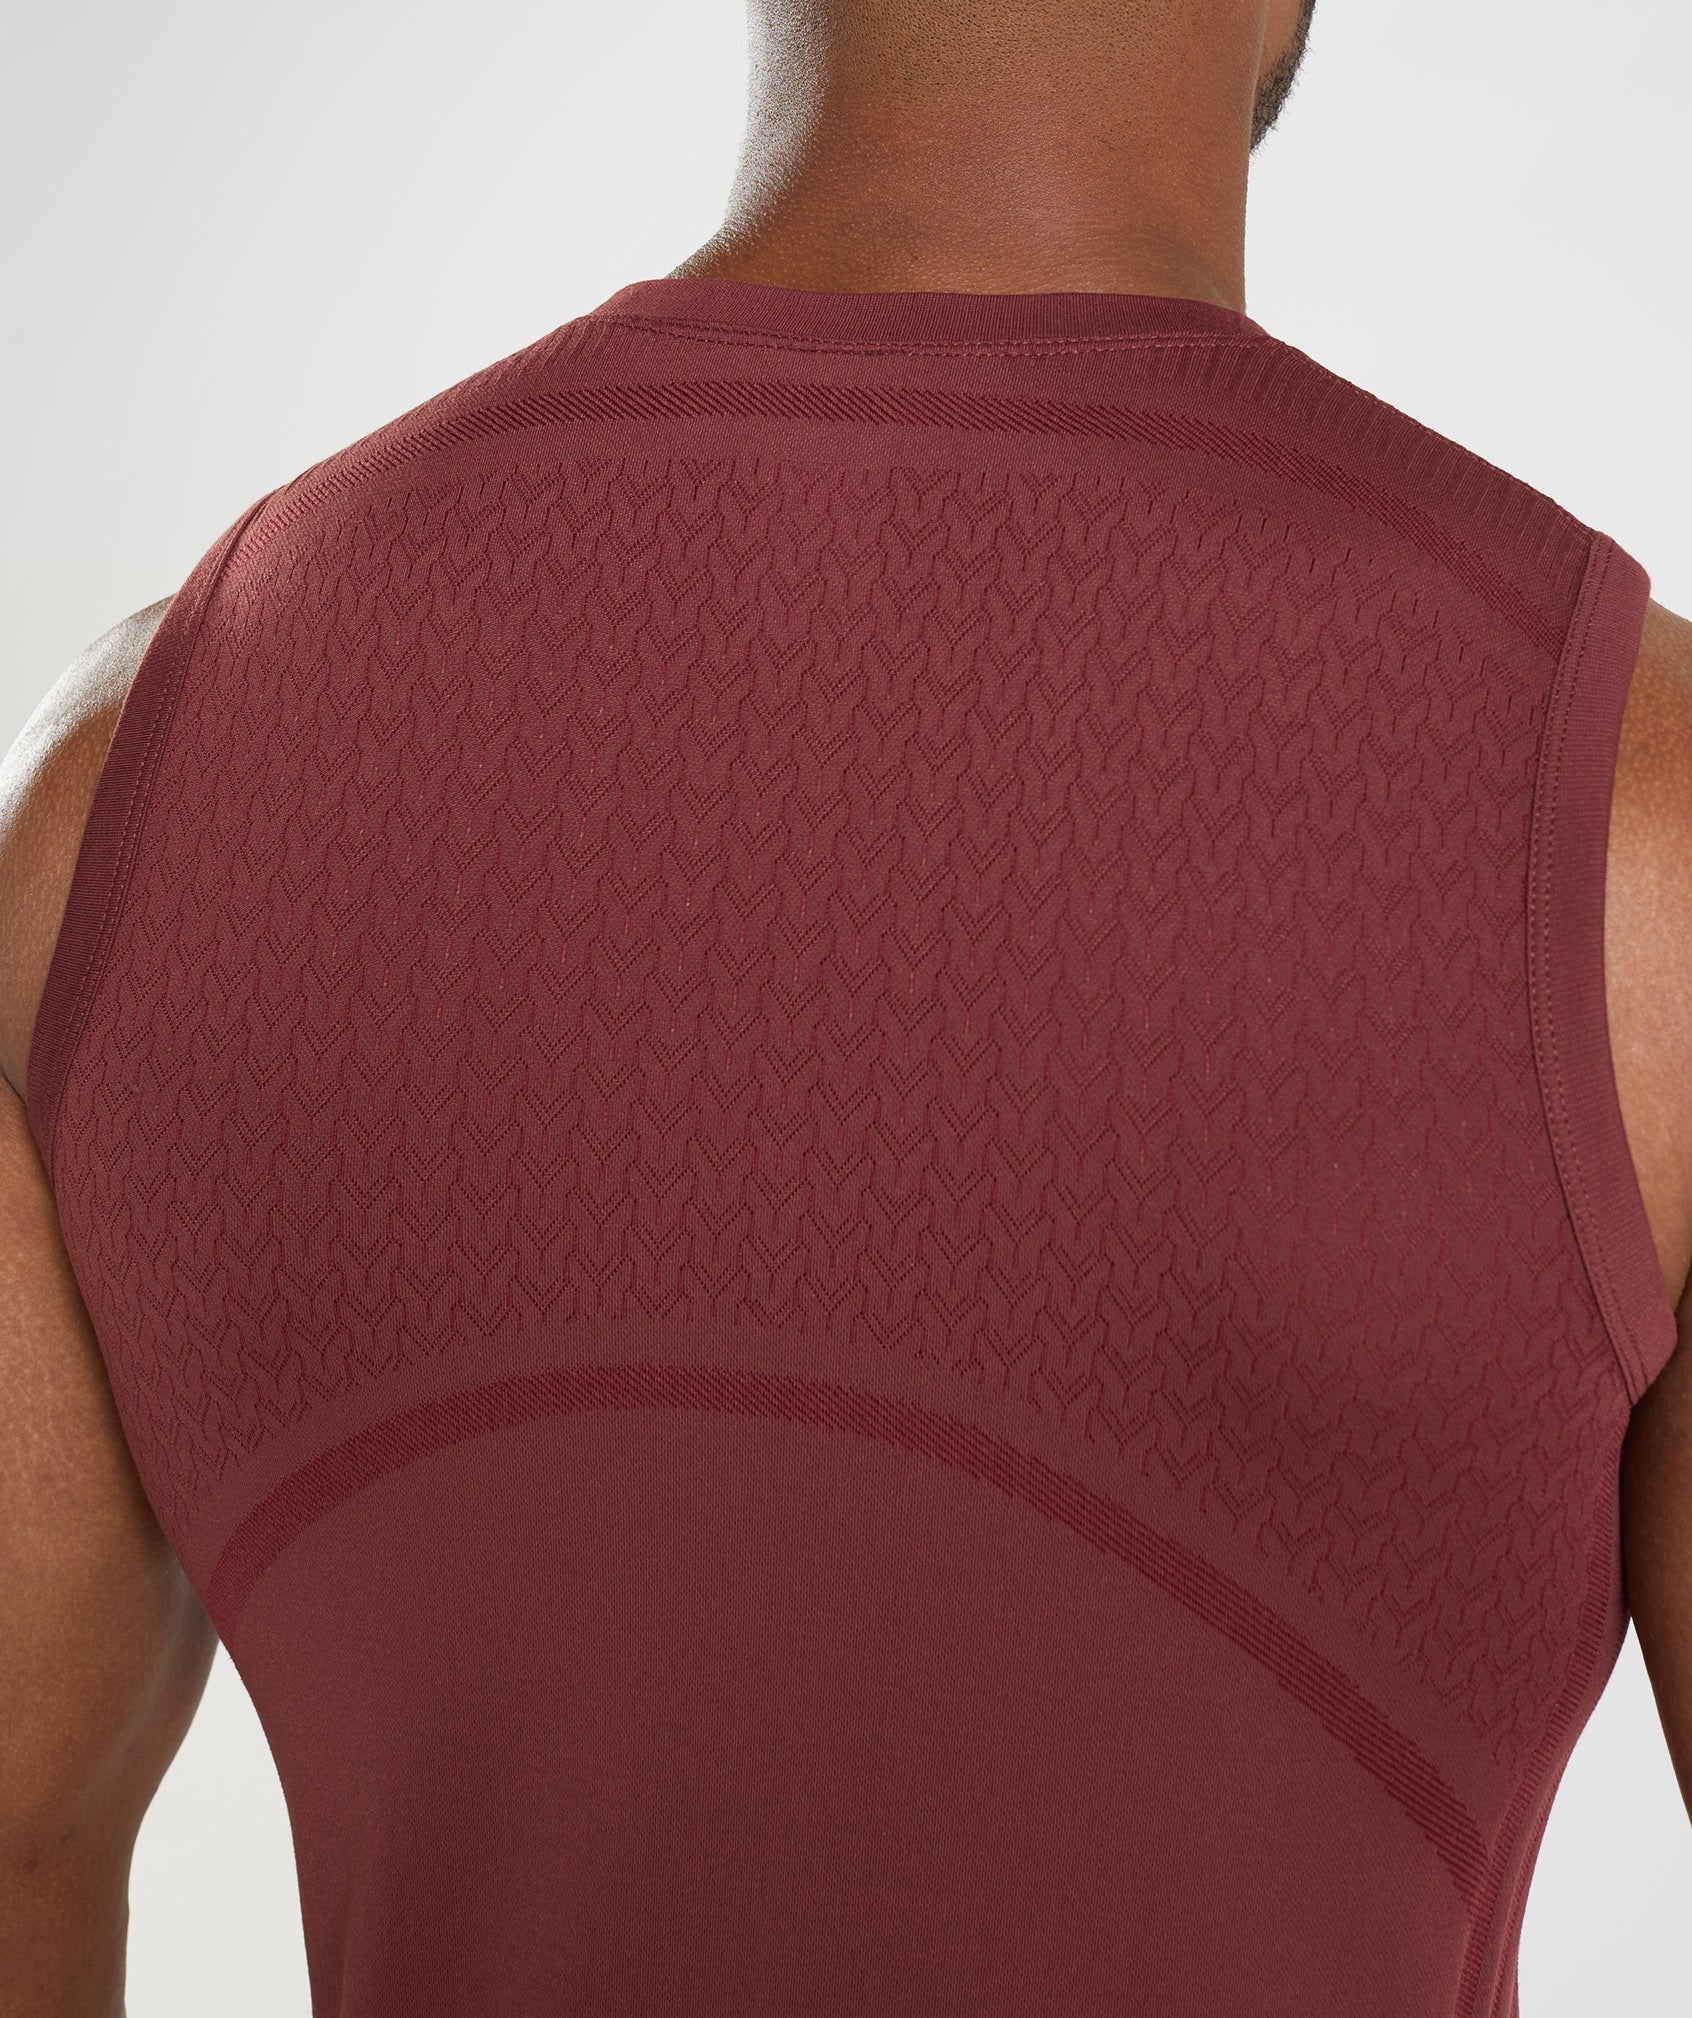 315 Seamless Tank in Cherry Brown - view 5